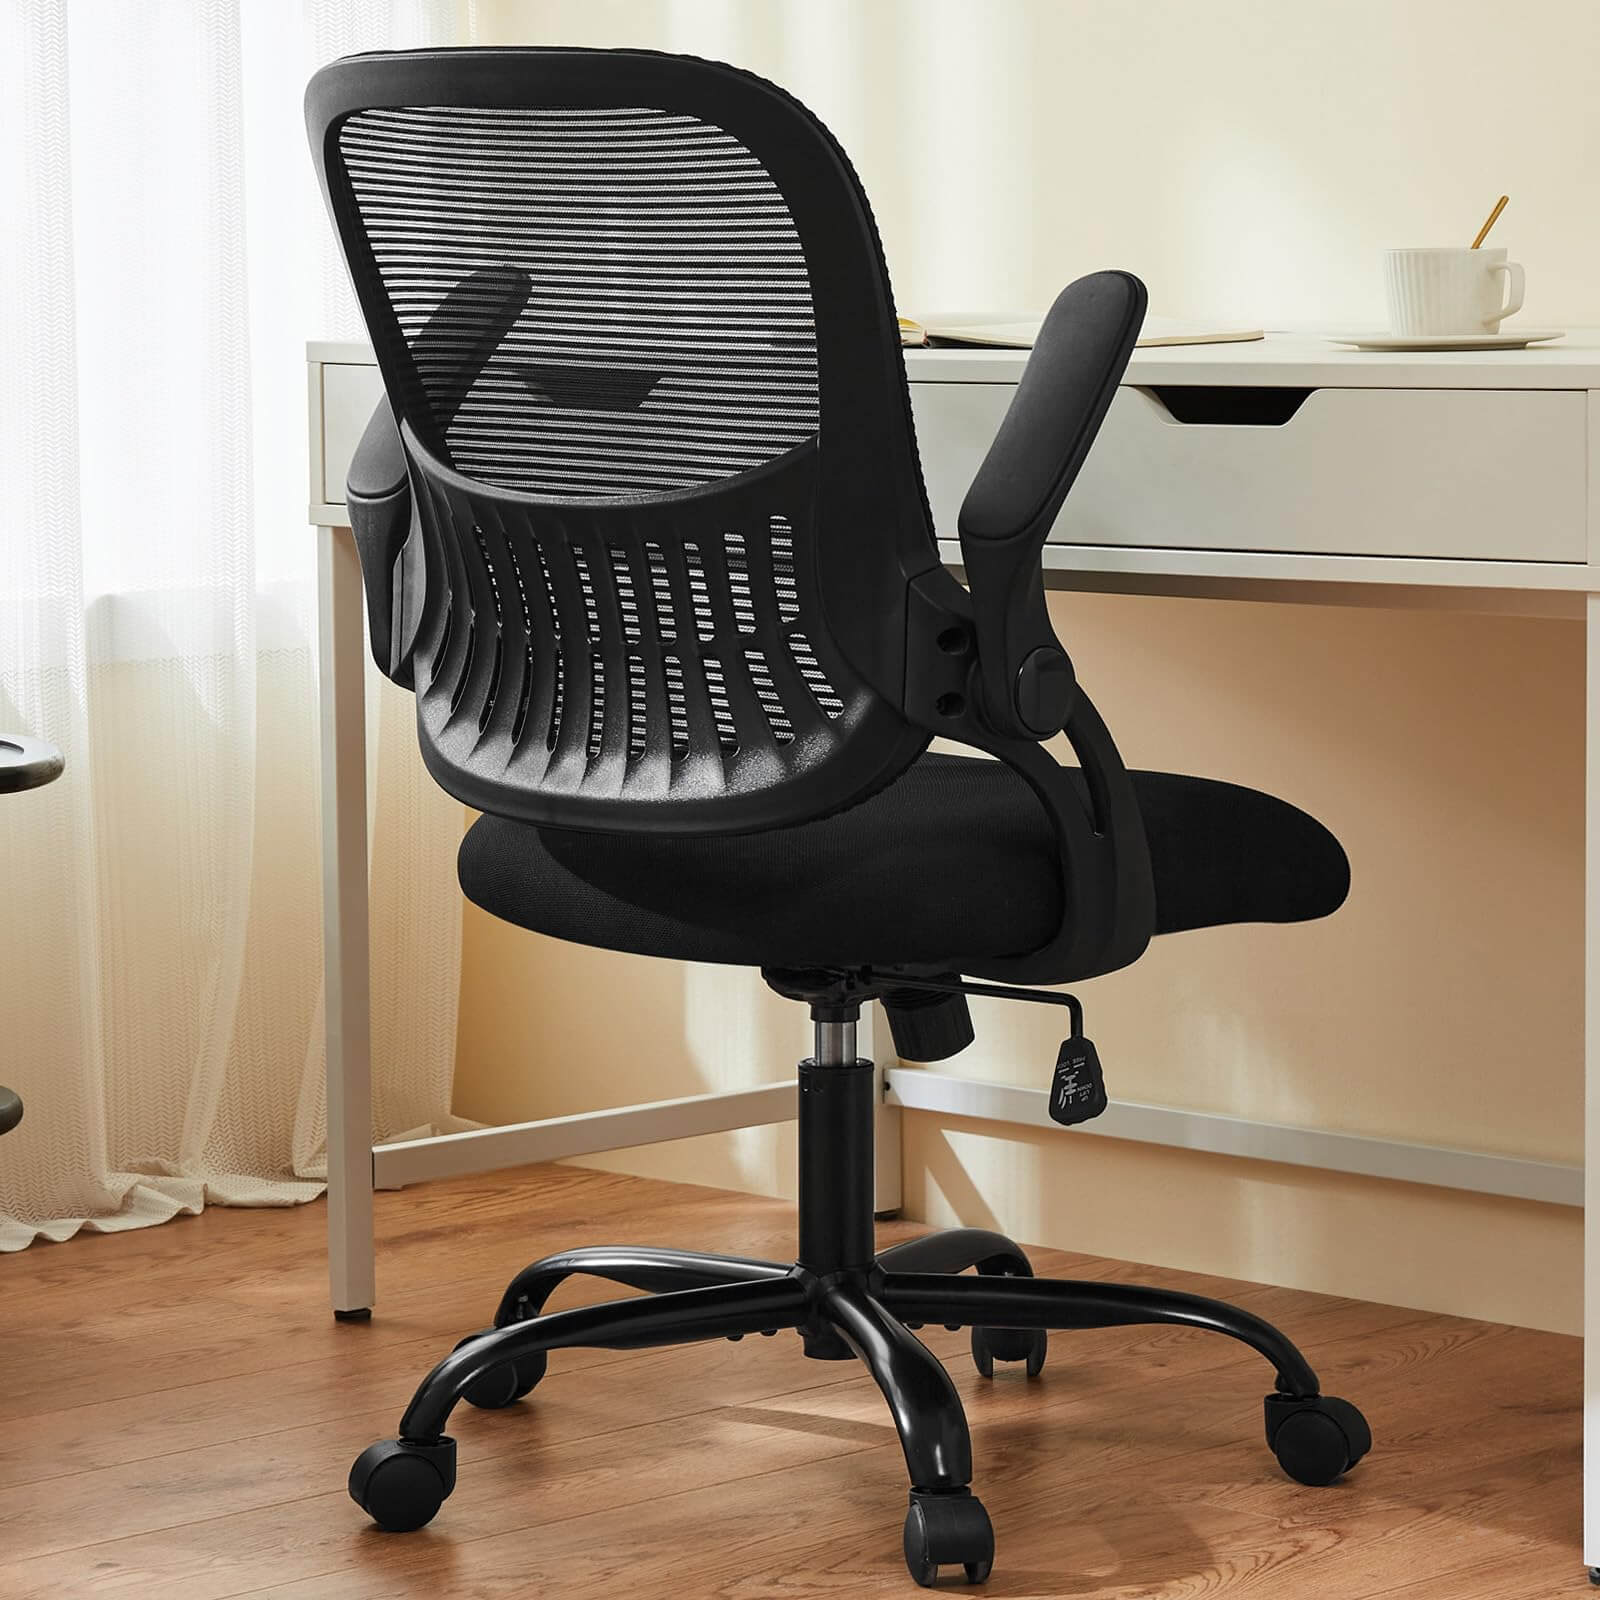 Ergonomic Home Mesh Office Desk Chairs with Flip up Armrests,Lumbar Su